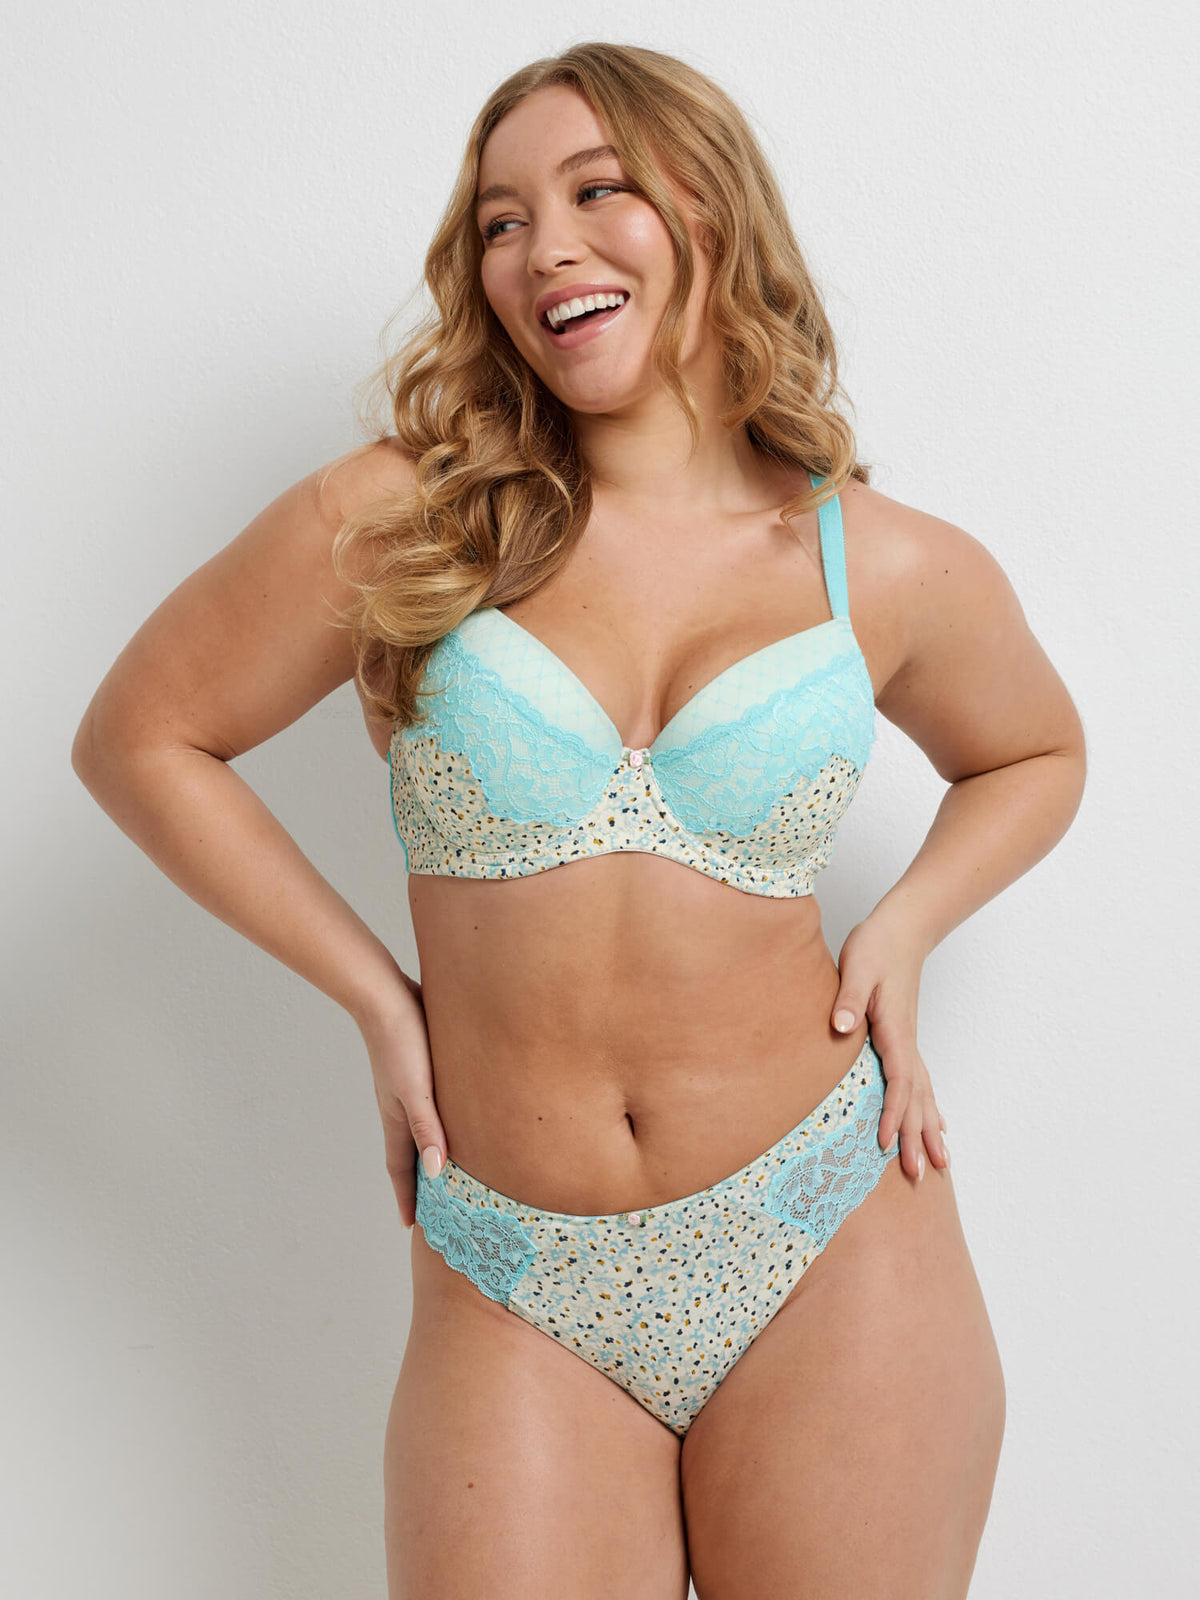 A woman wearing a cream loral bra with blue lace detail